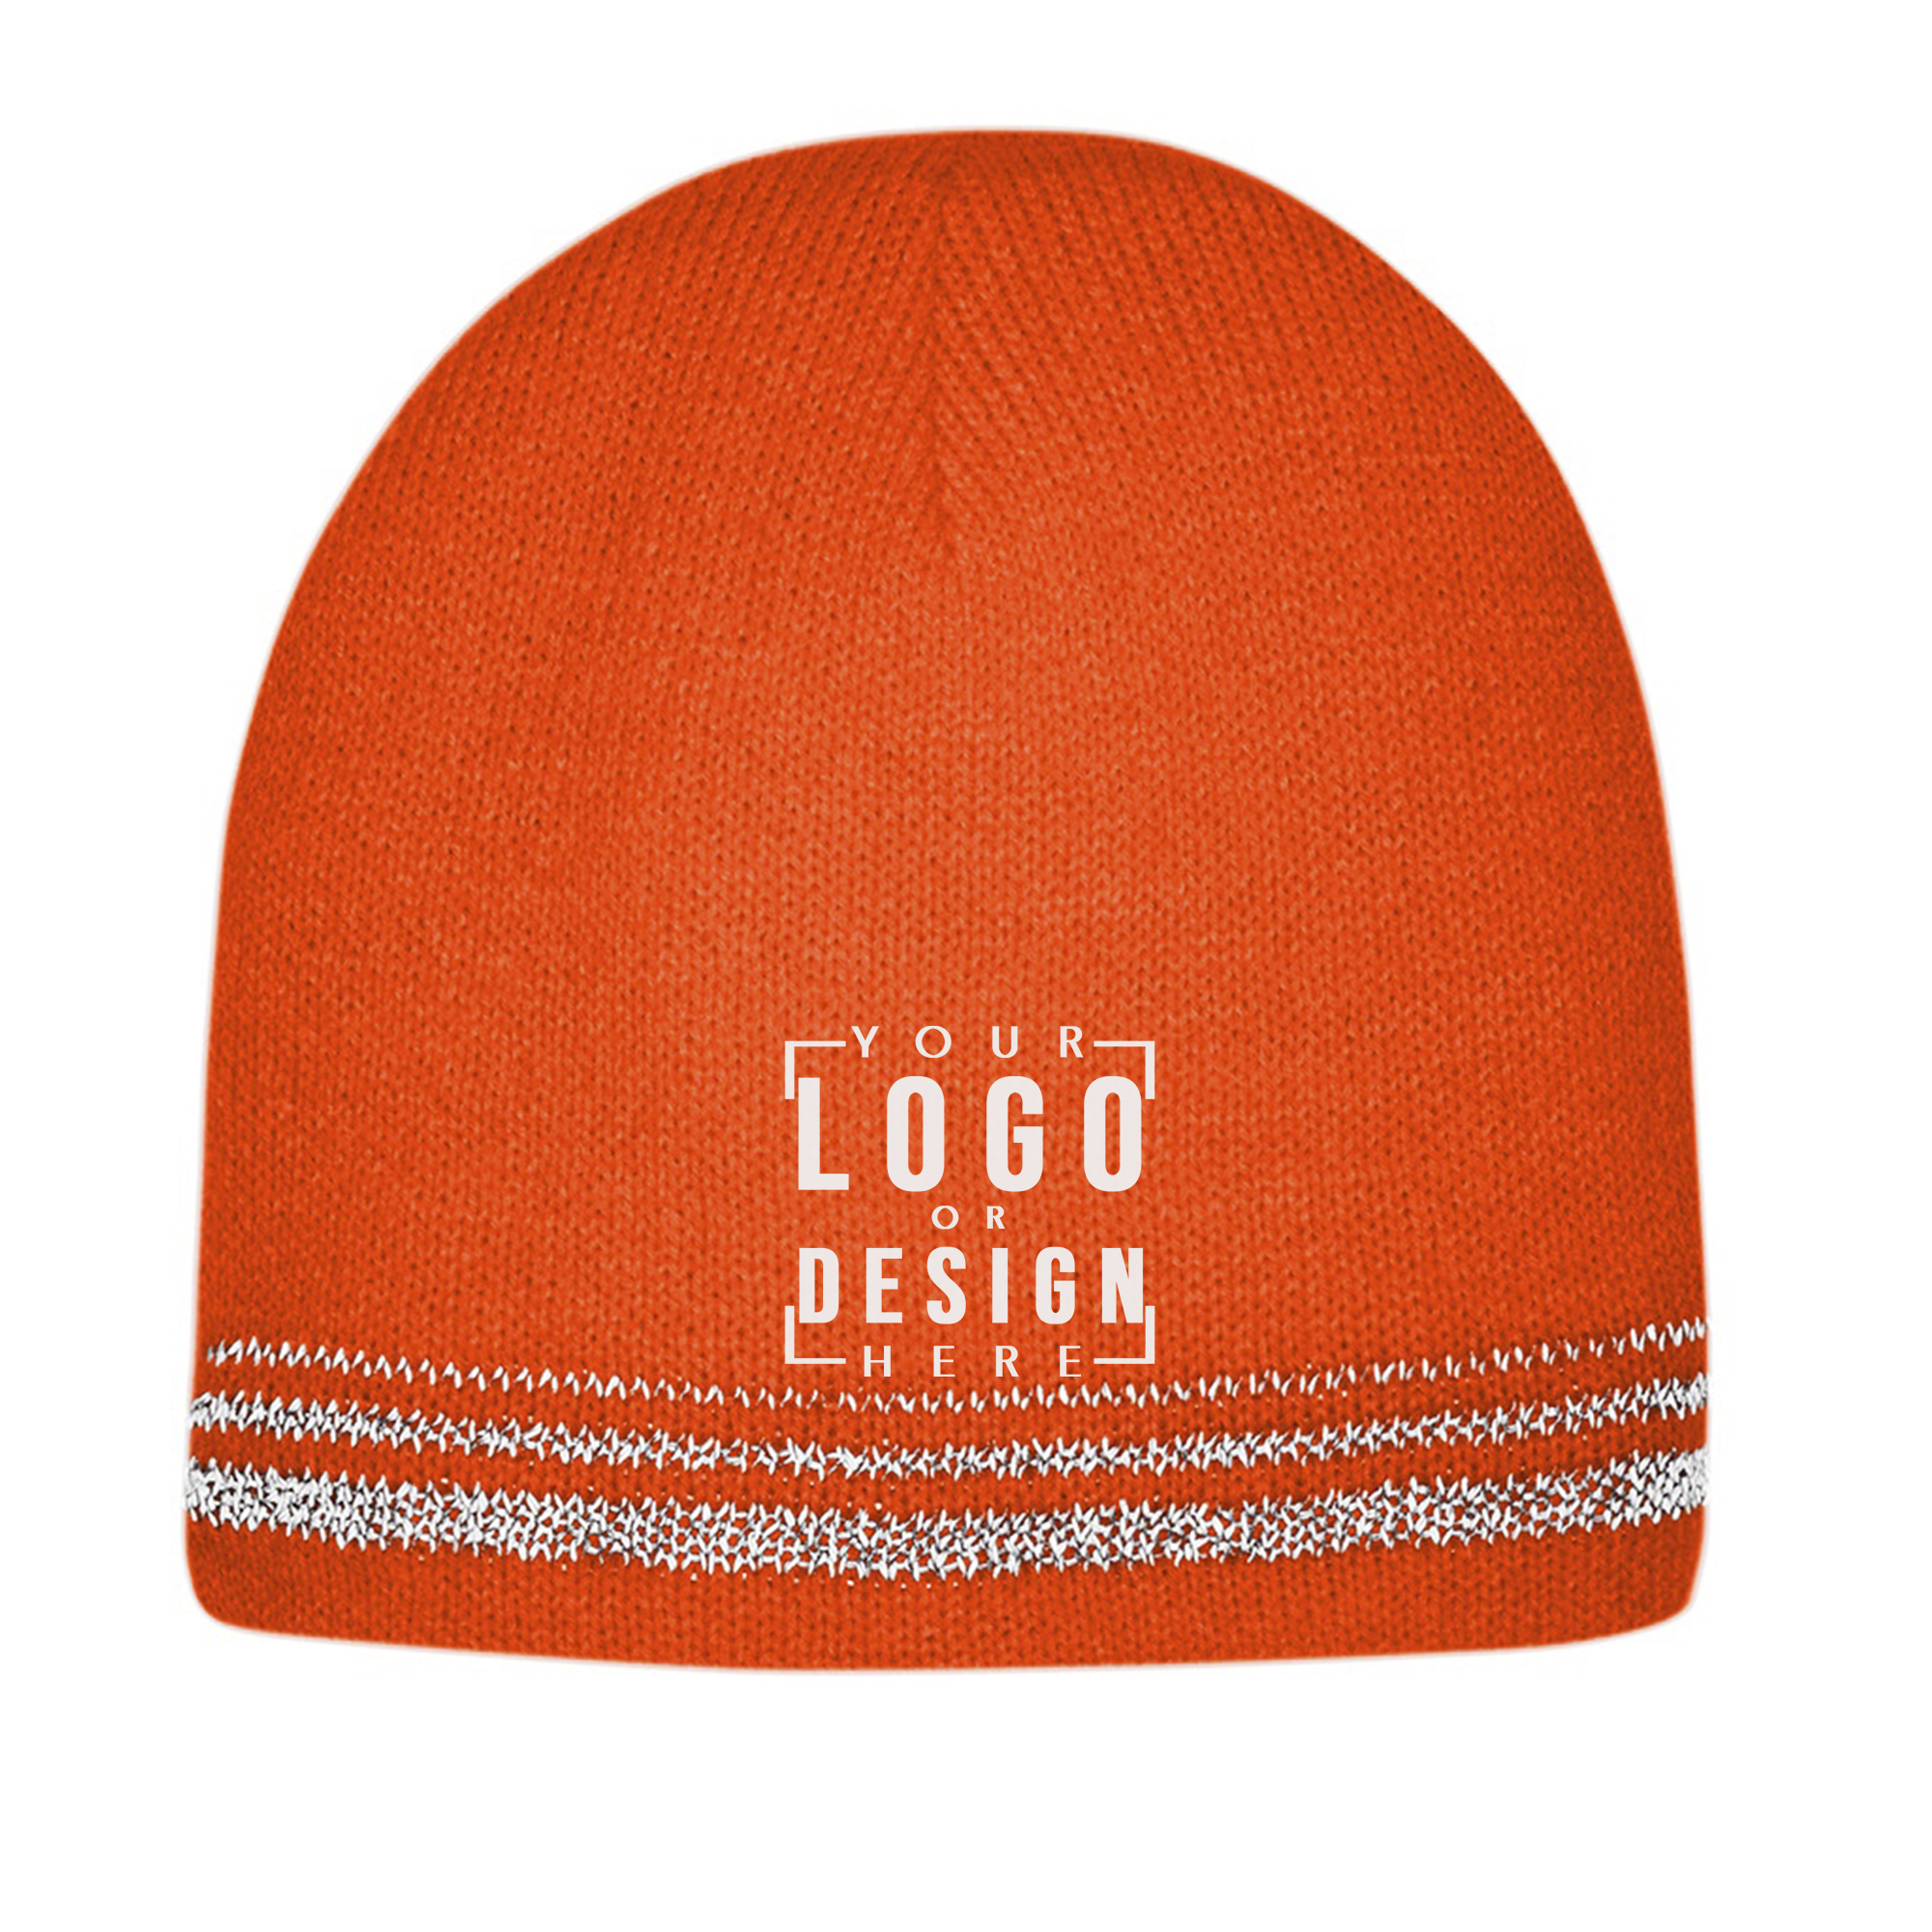 CornerStone Lined Enhanced Visibility with Reflective Stripes Beanie